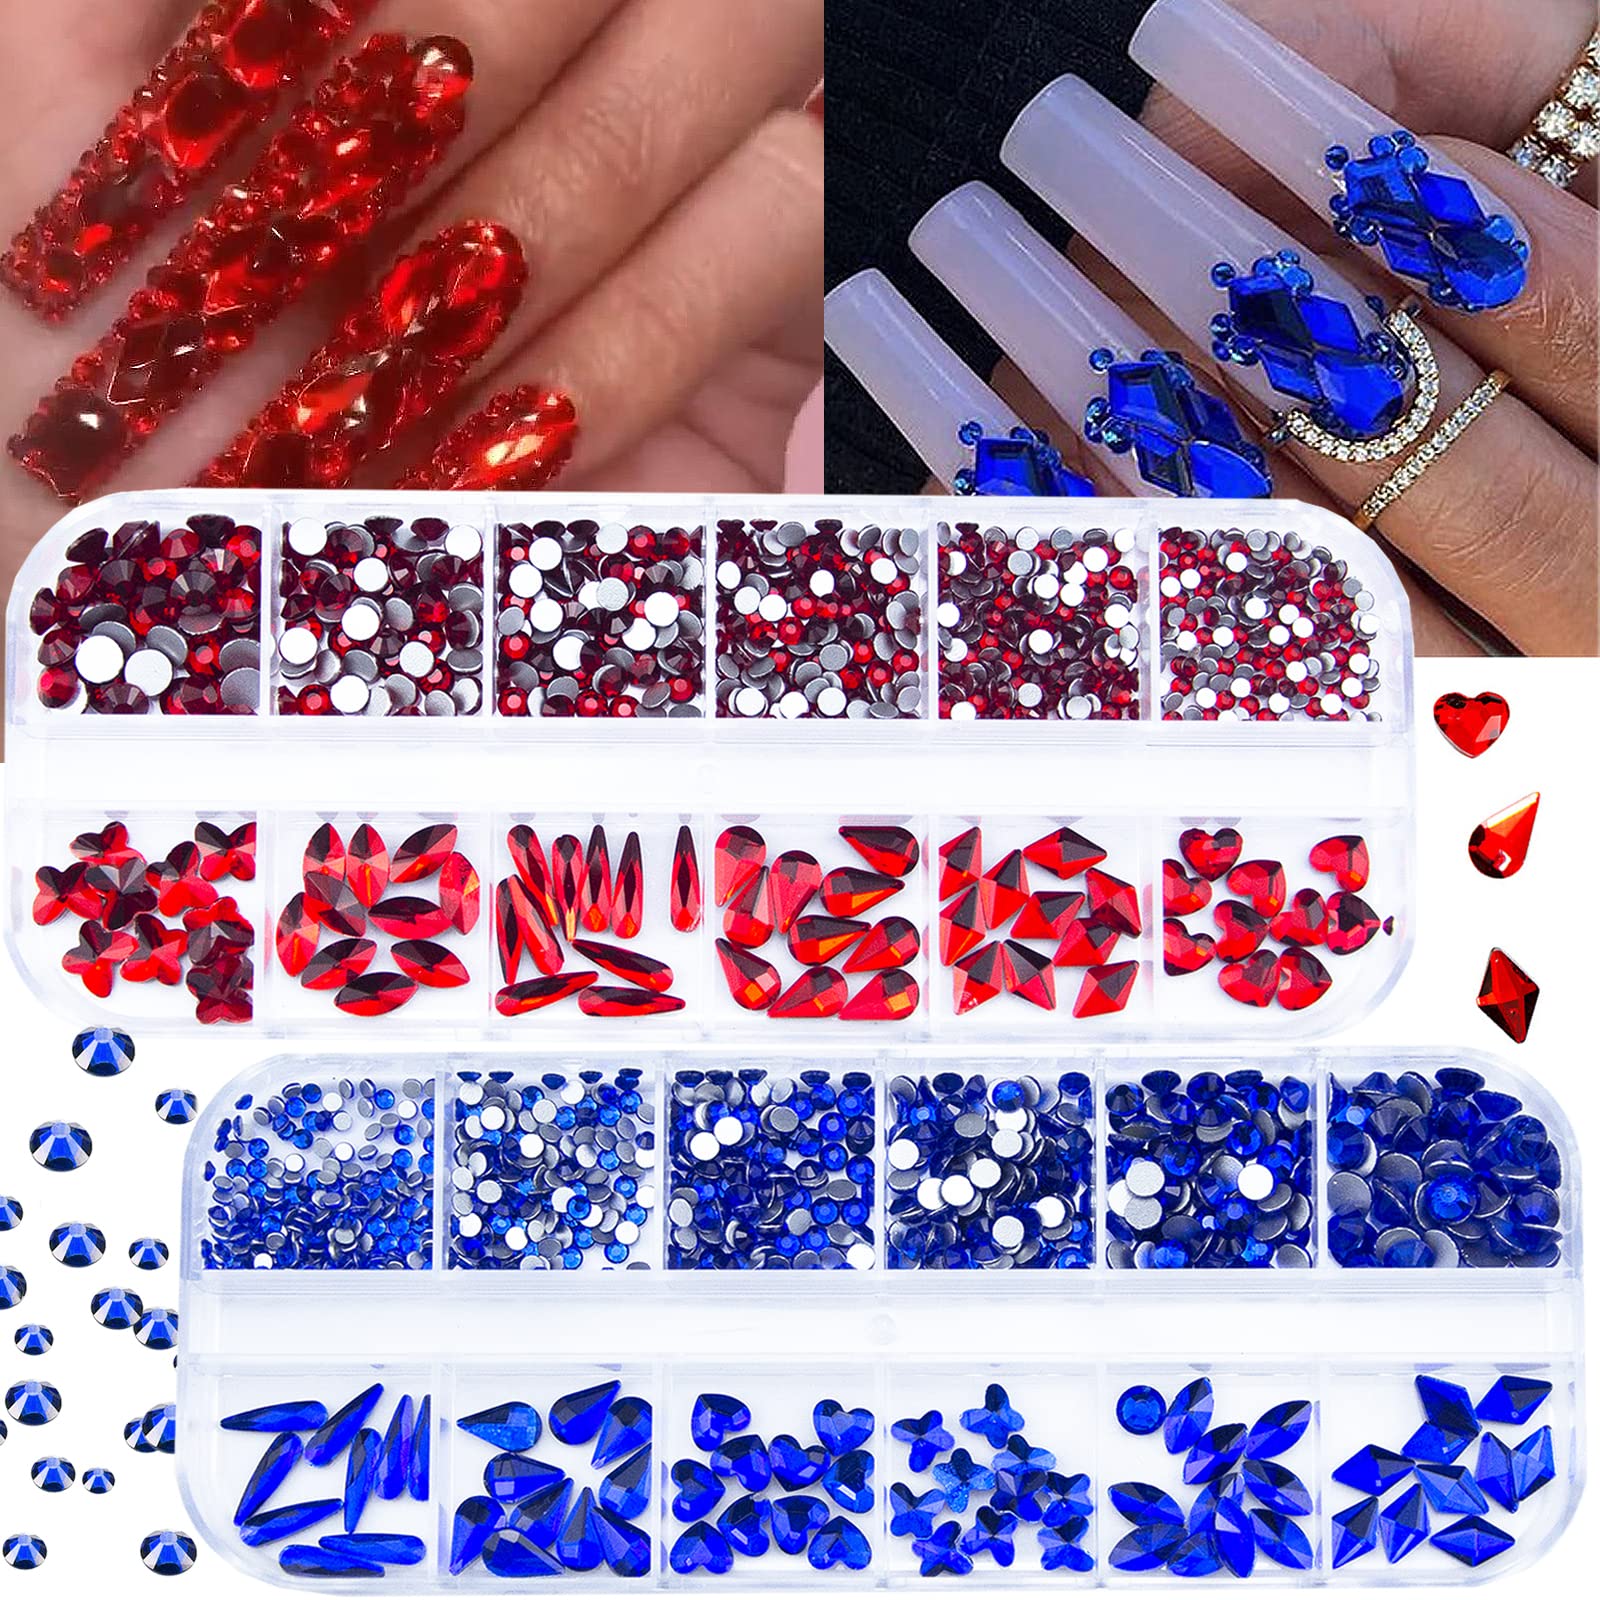 Sohindel Nail Crystals Nail Jewels Rhinestones Round Beads Flatback Glass Charms Gems Nail Studs for Nails Decoration - Style 3, Women's